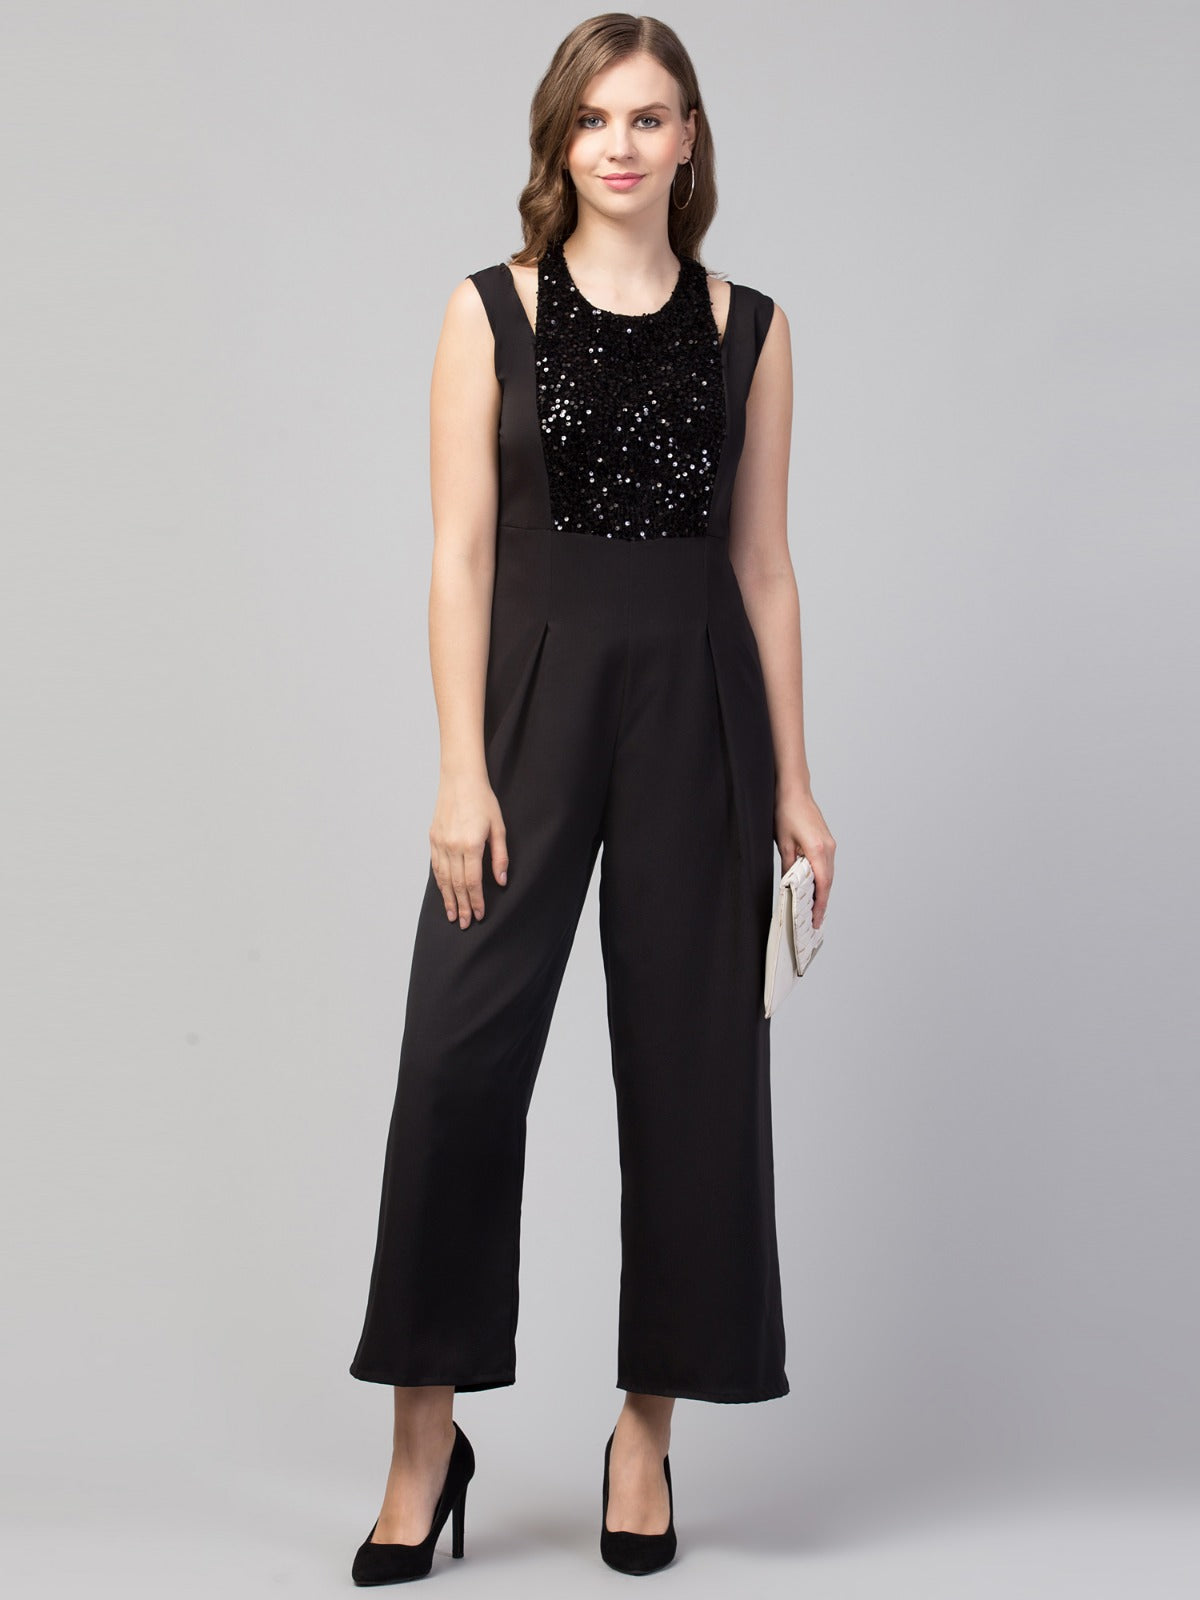 Women Girls Sequined Style Sleeveless Solid Jumpsuit